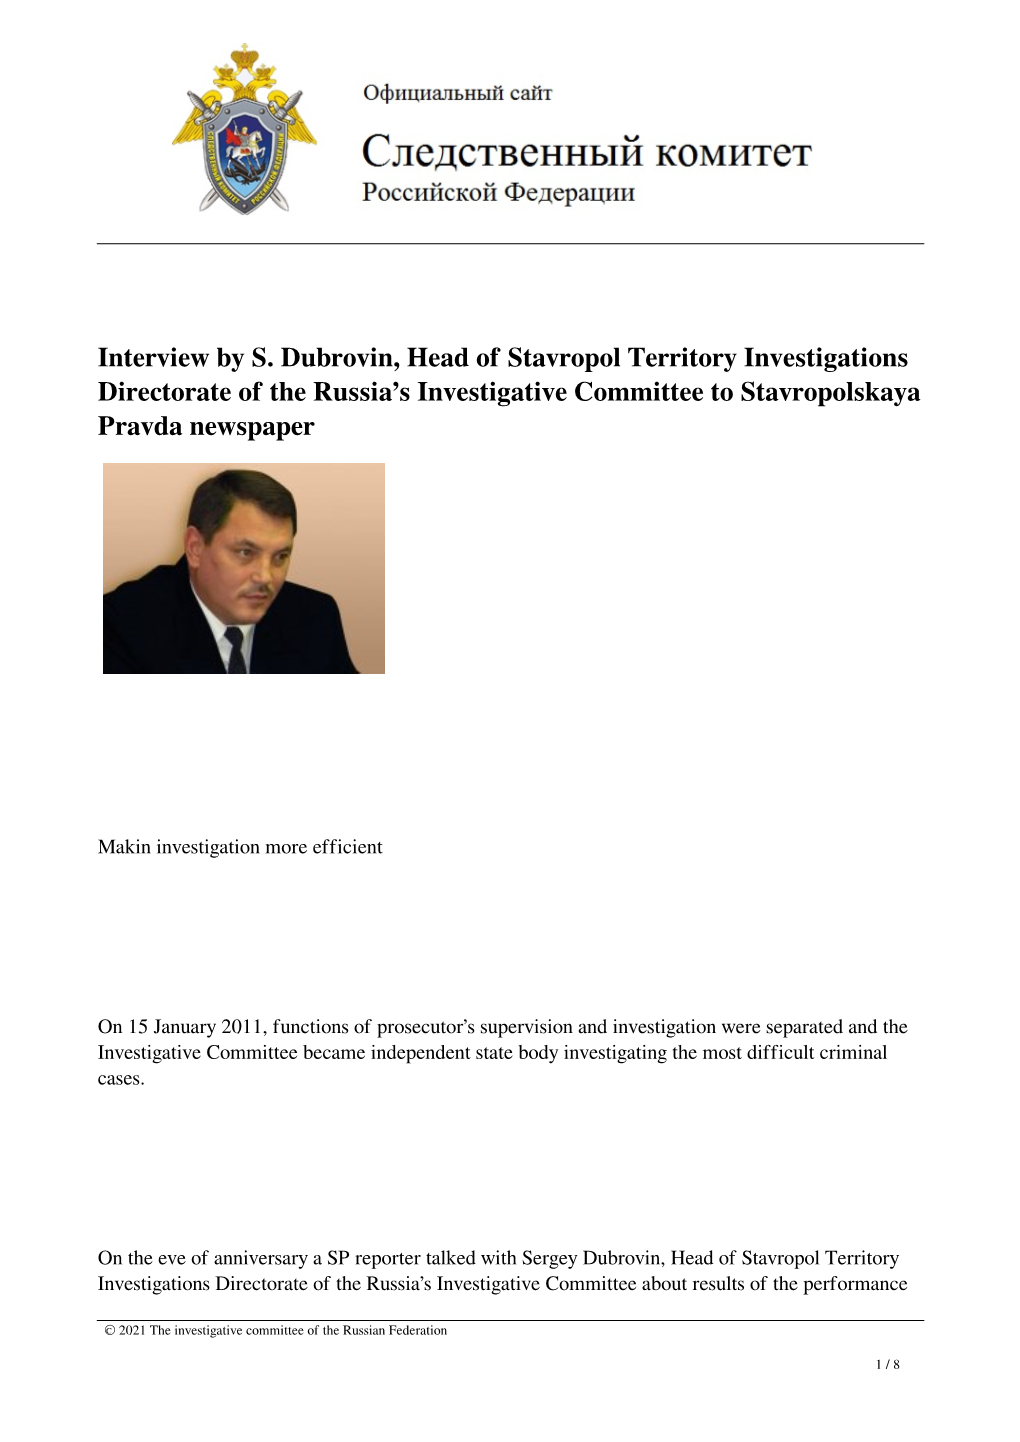 Interview by S. Dubrovin, Head of Stavropol Territory Investigations Directorate of the Russia’S Investigative Committee to Stavropolskaya Pravda Newspaper